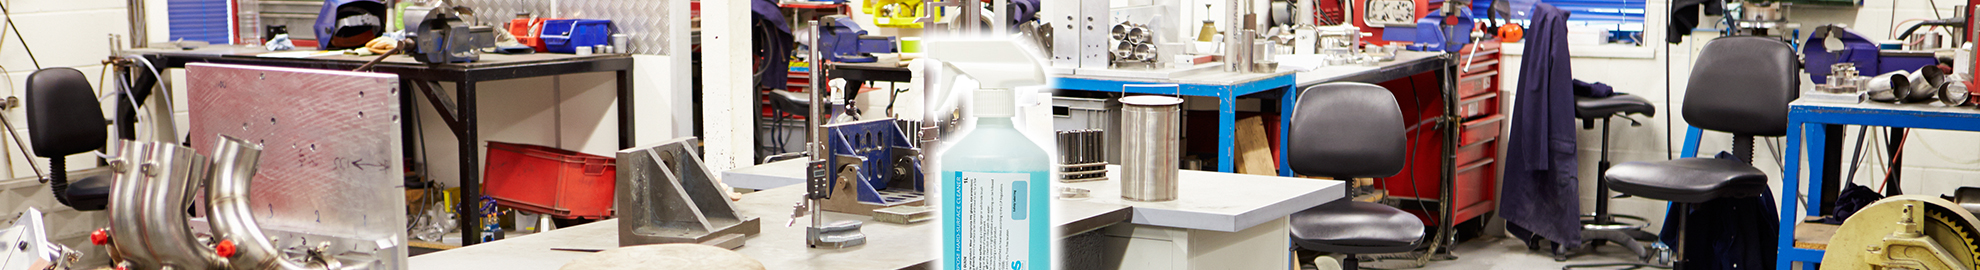 New Biozone SC Surface Cleaner - click for more details